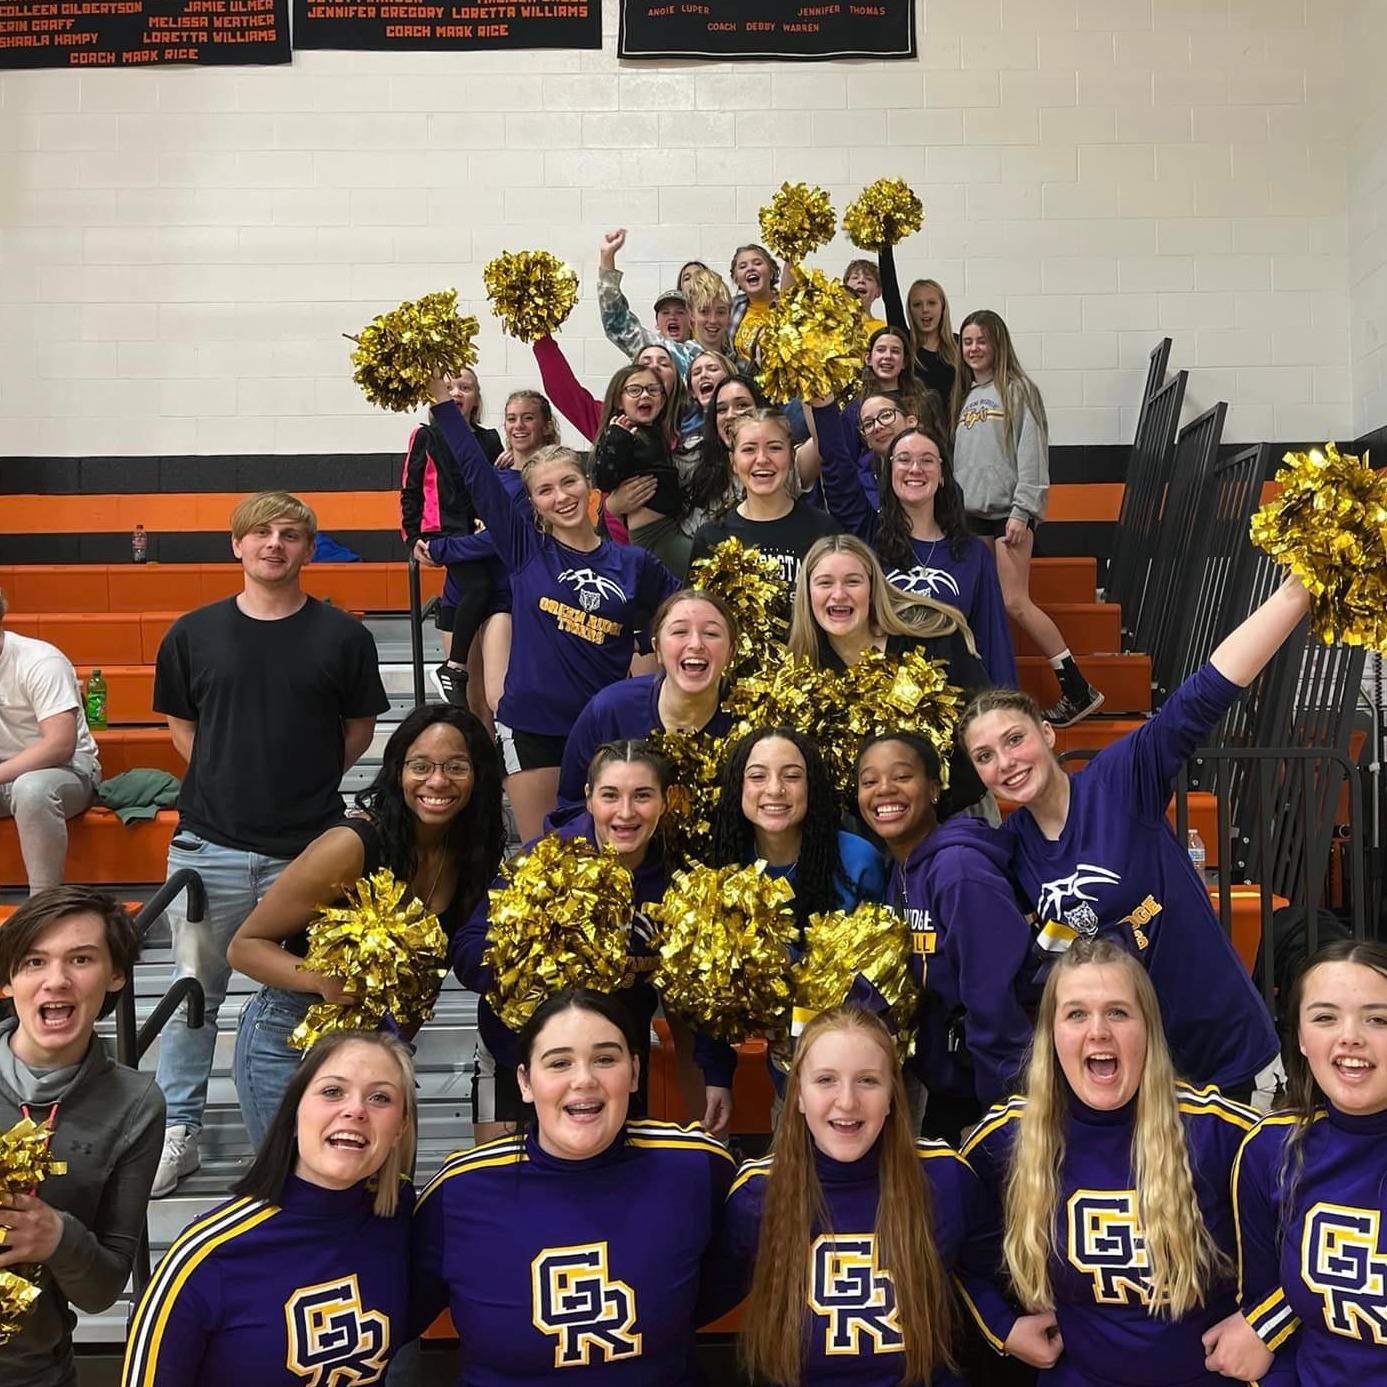 student section cheering at basketball game